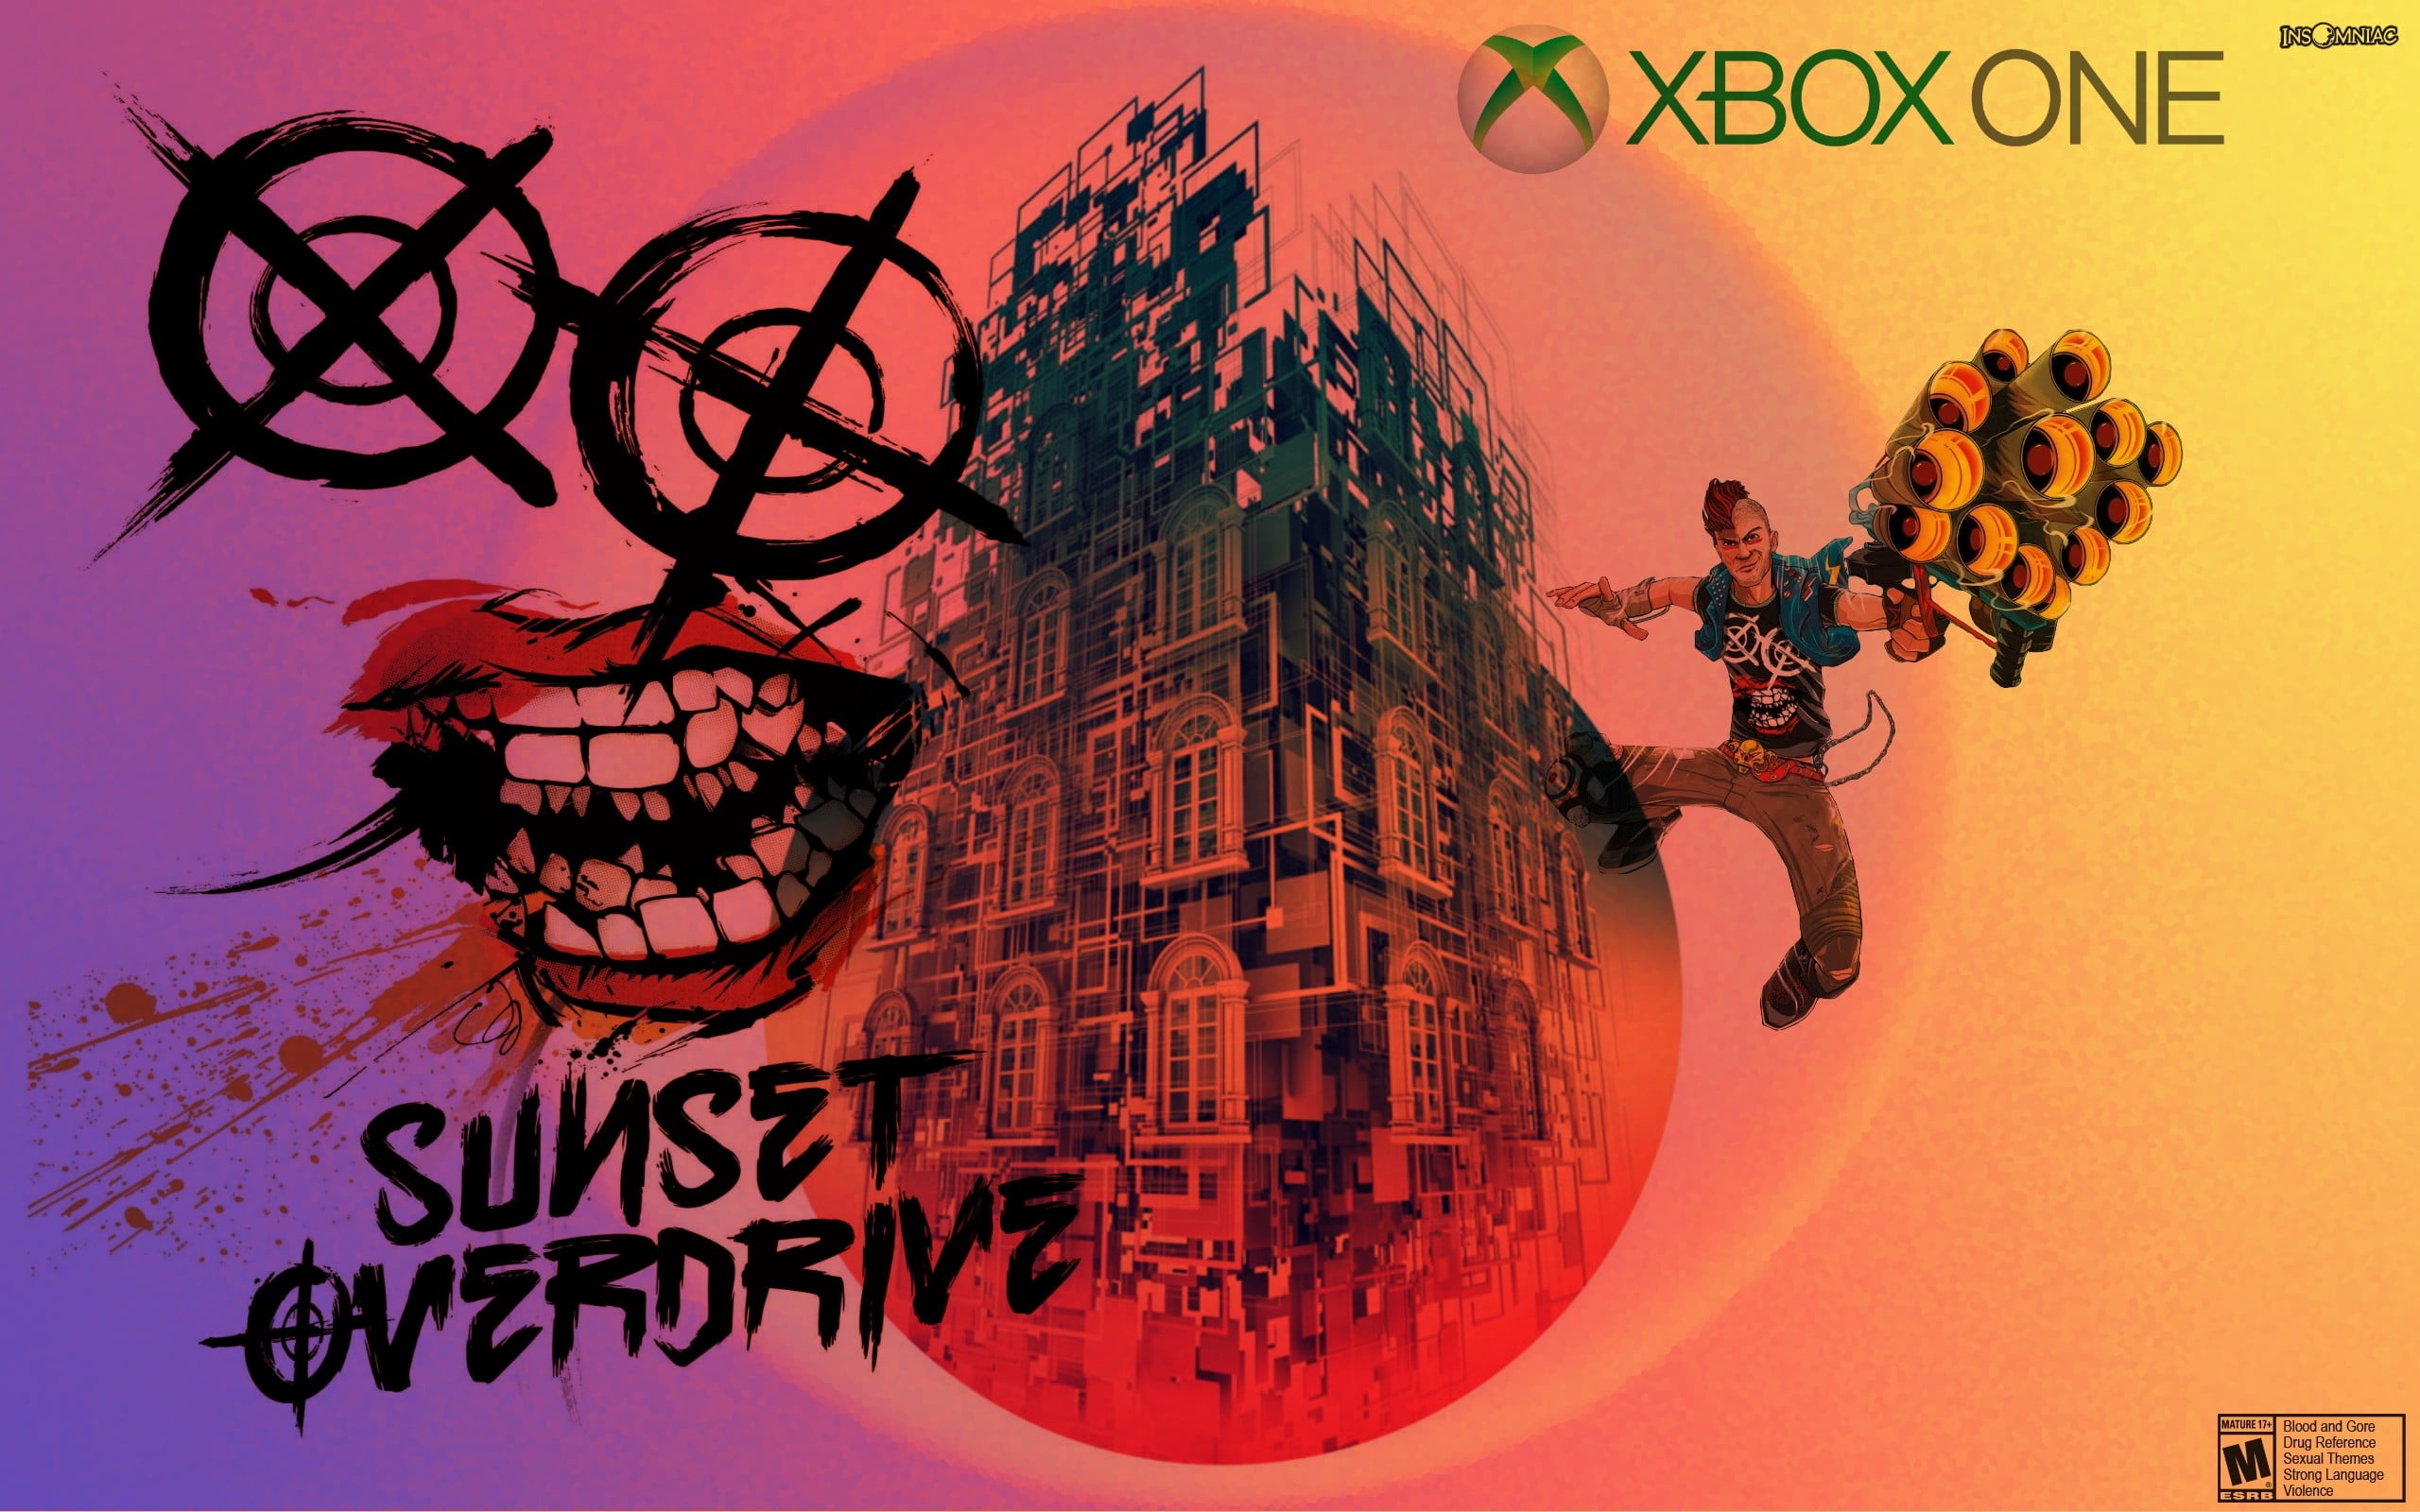 Sunset Overdrive, Sunset Overdrive poster, Sunset Overdrive postcard,  poster, postcard, print, Insomniac, xbox, video game, gamer, gaymers